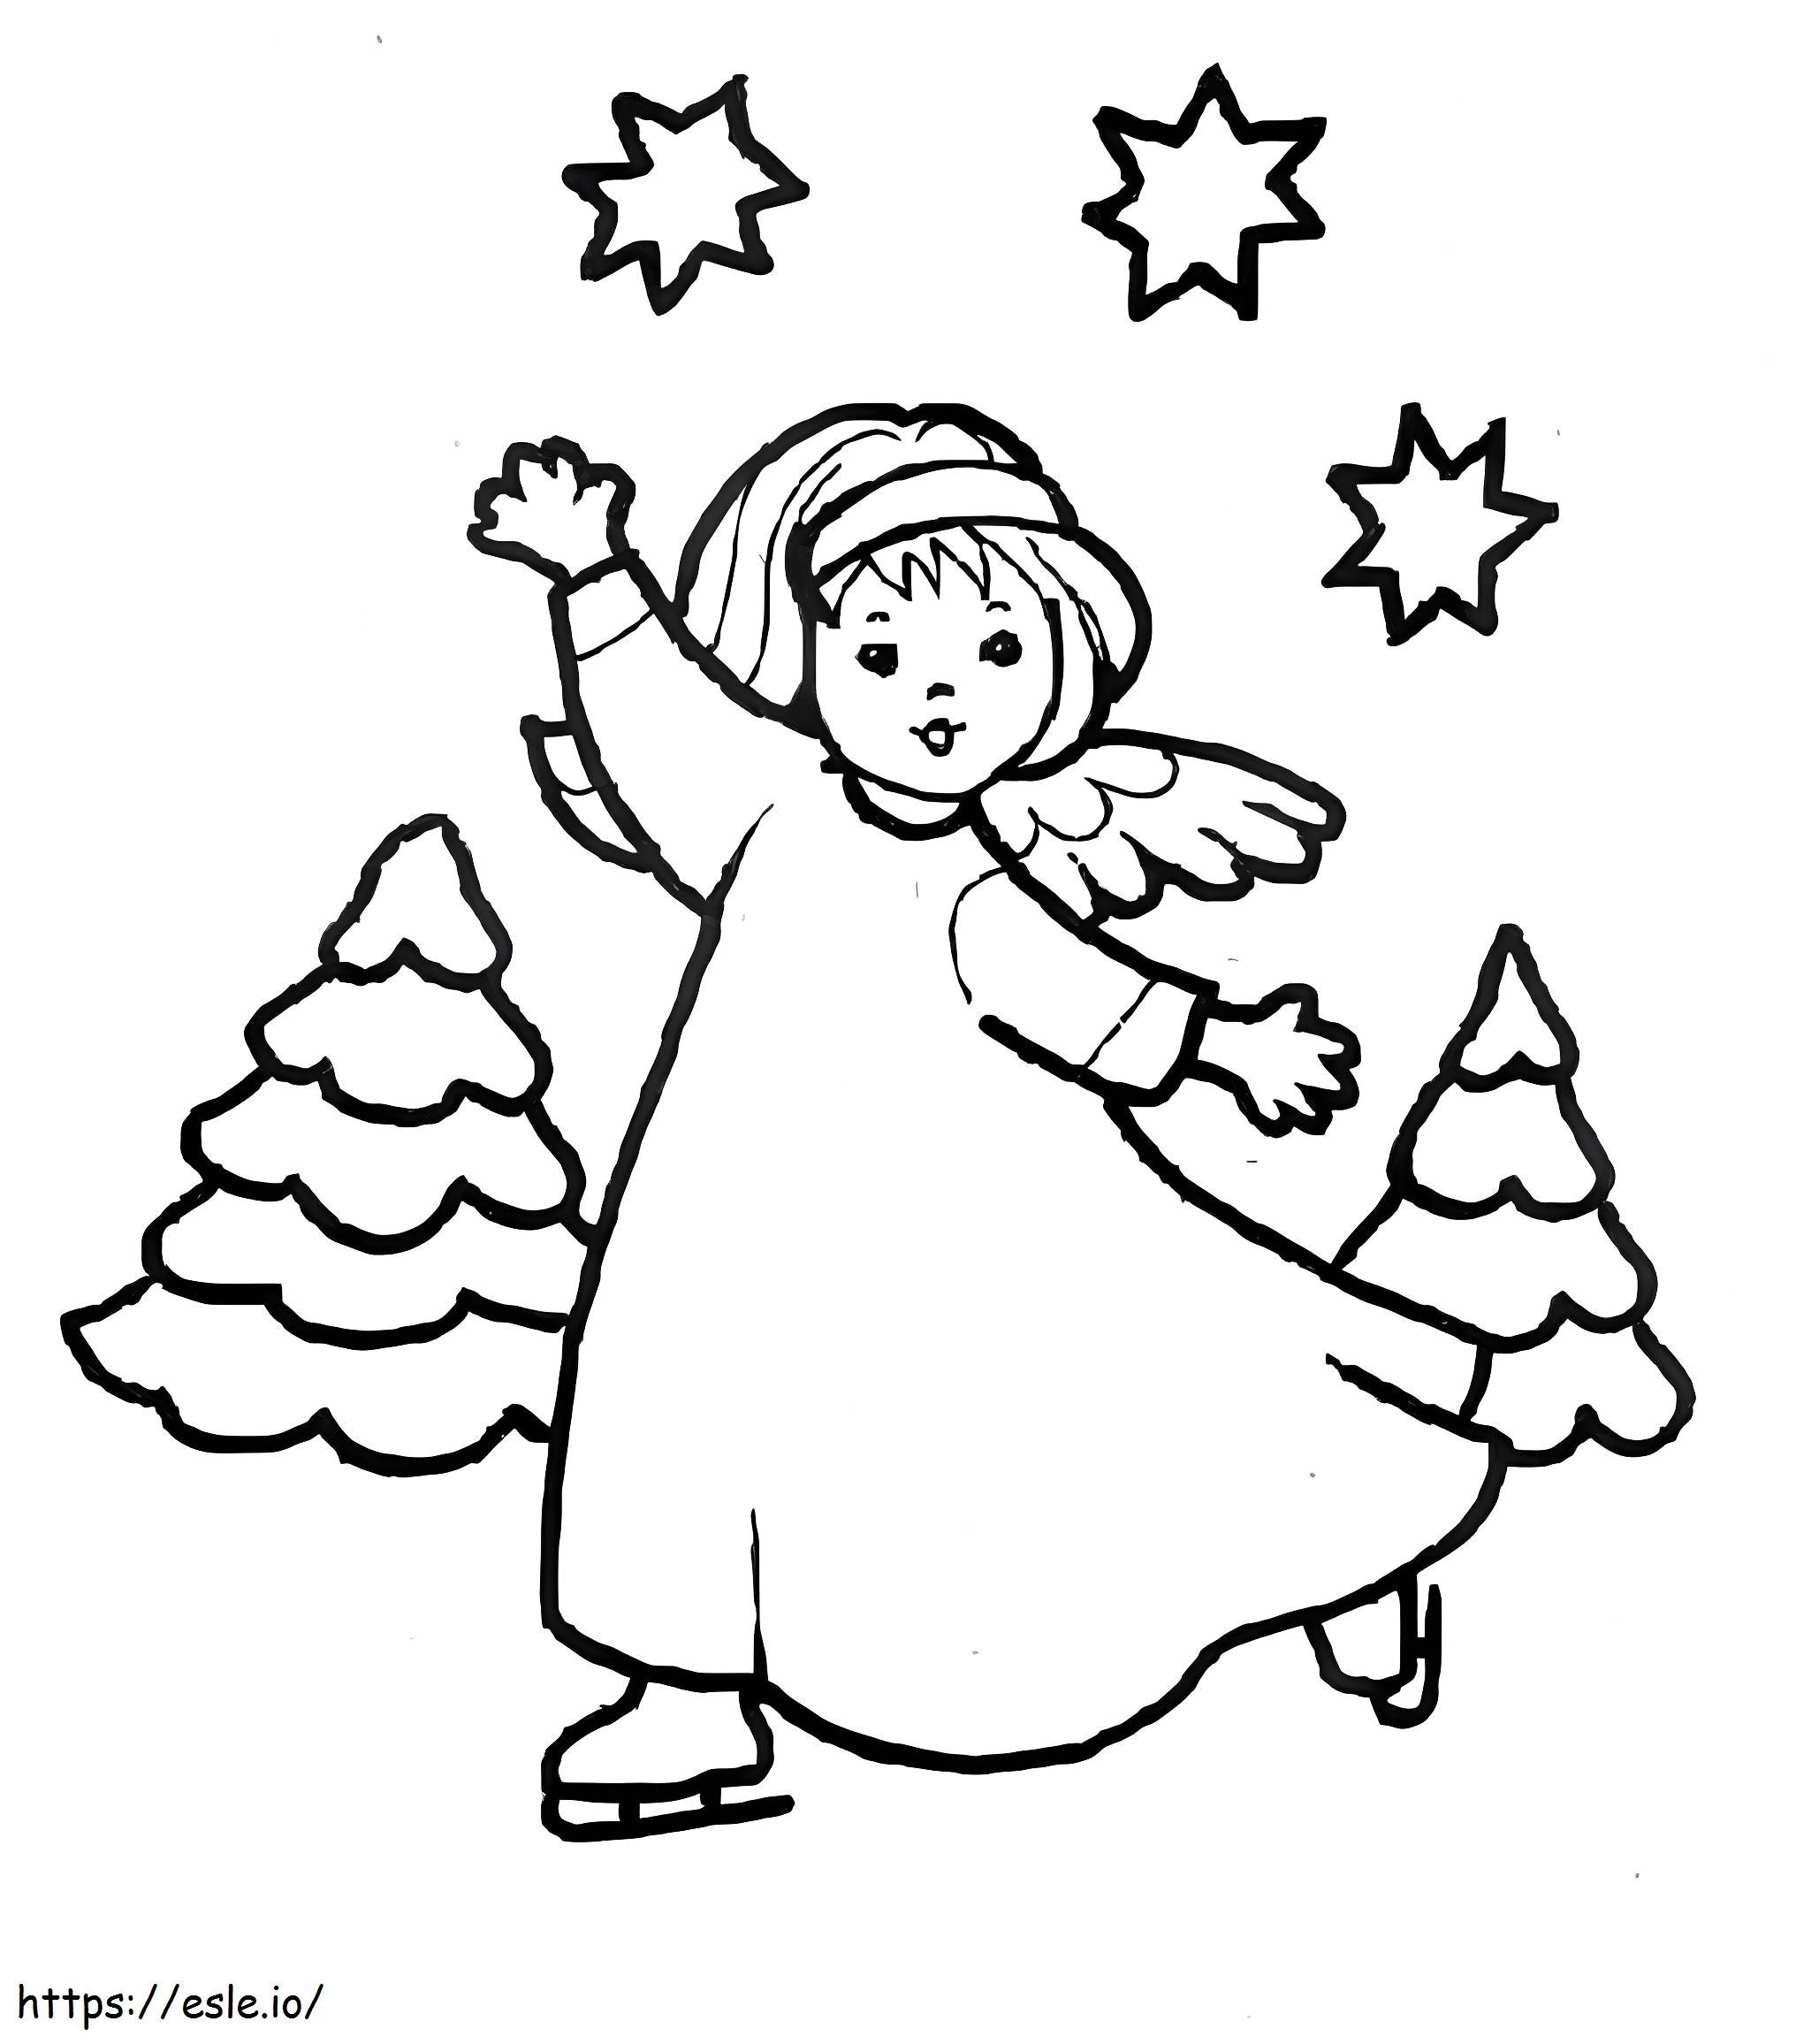 Little Christmas Angel 1 coloring page